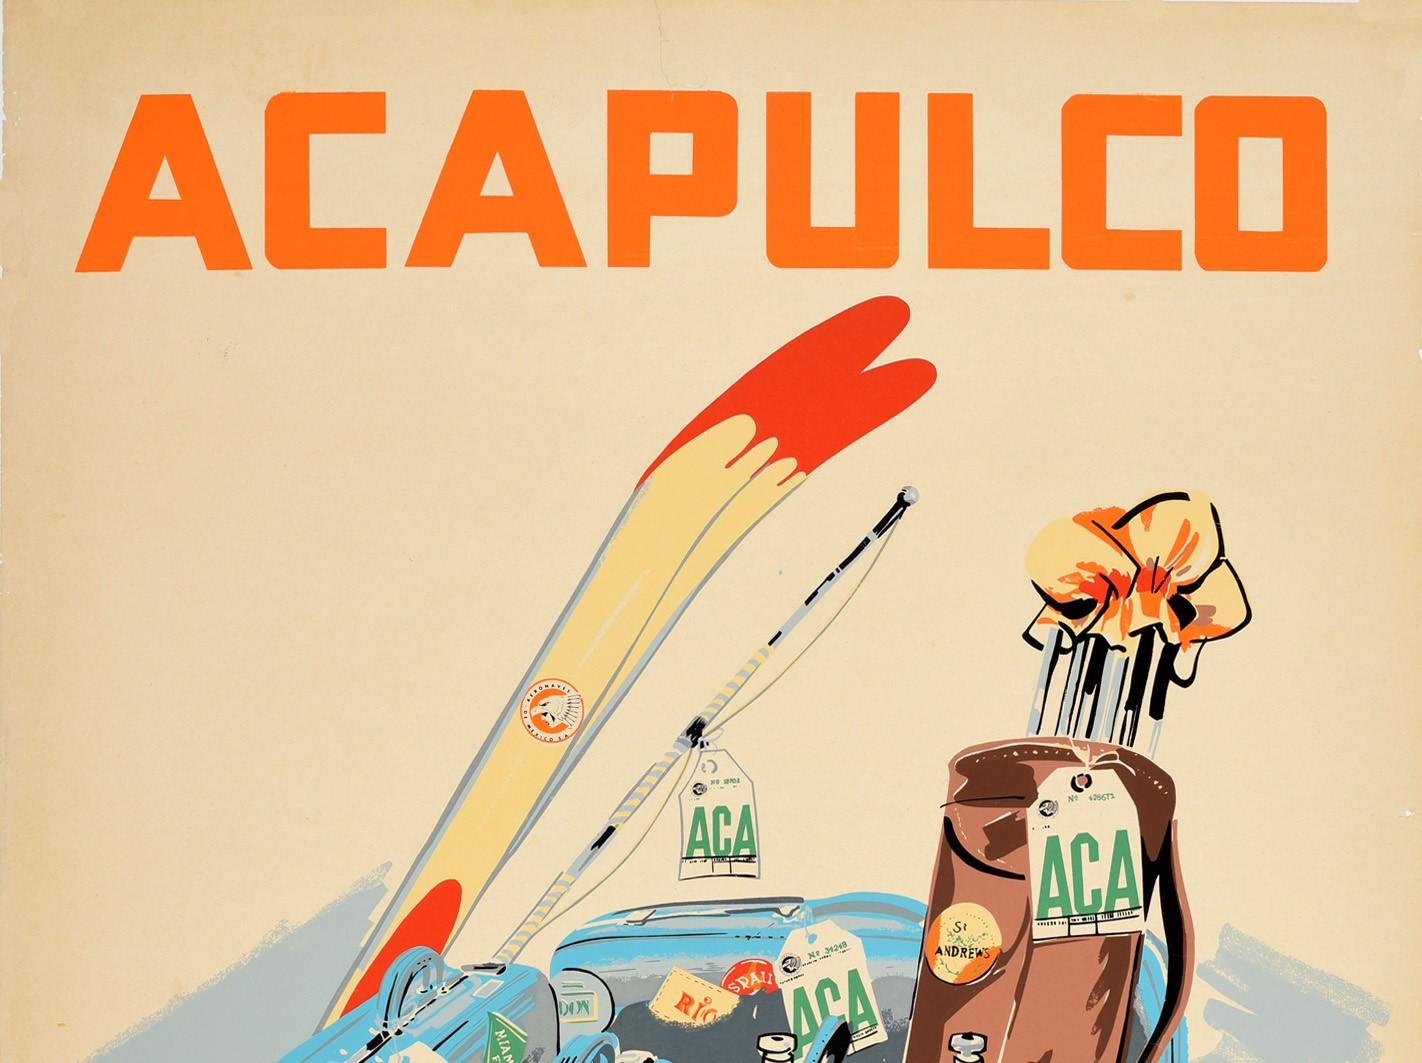 Original vintage air travel poster for Acapulco issued by Aeronaves De Mexico (Aeromexico; founded 1934) featuring a great image depicting scuba diving tanks and equipment including a mask and fins with suitcases and bags, a golf set and skis as